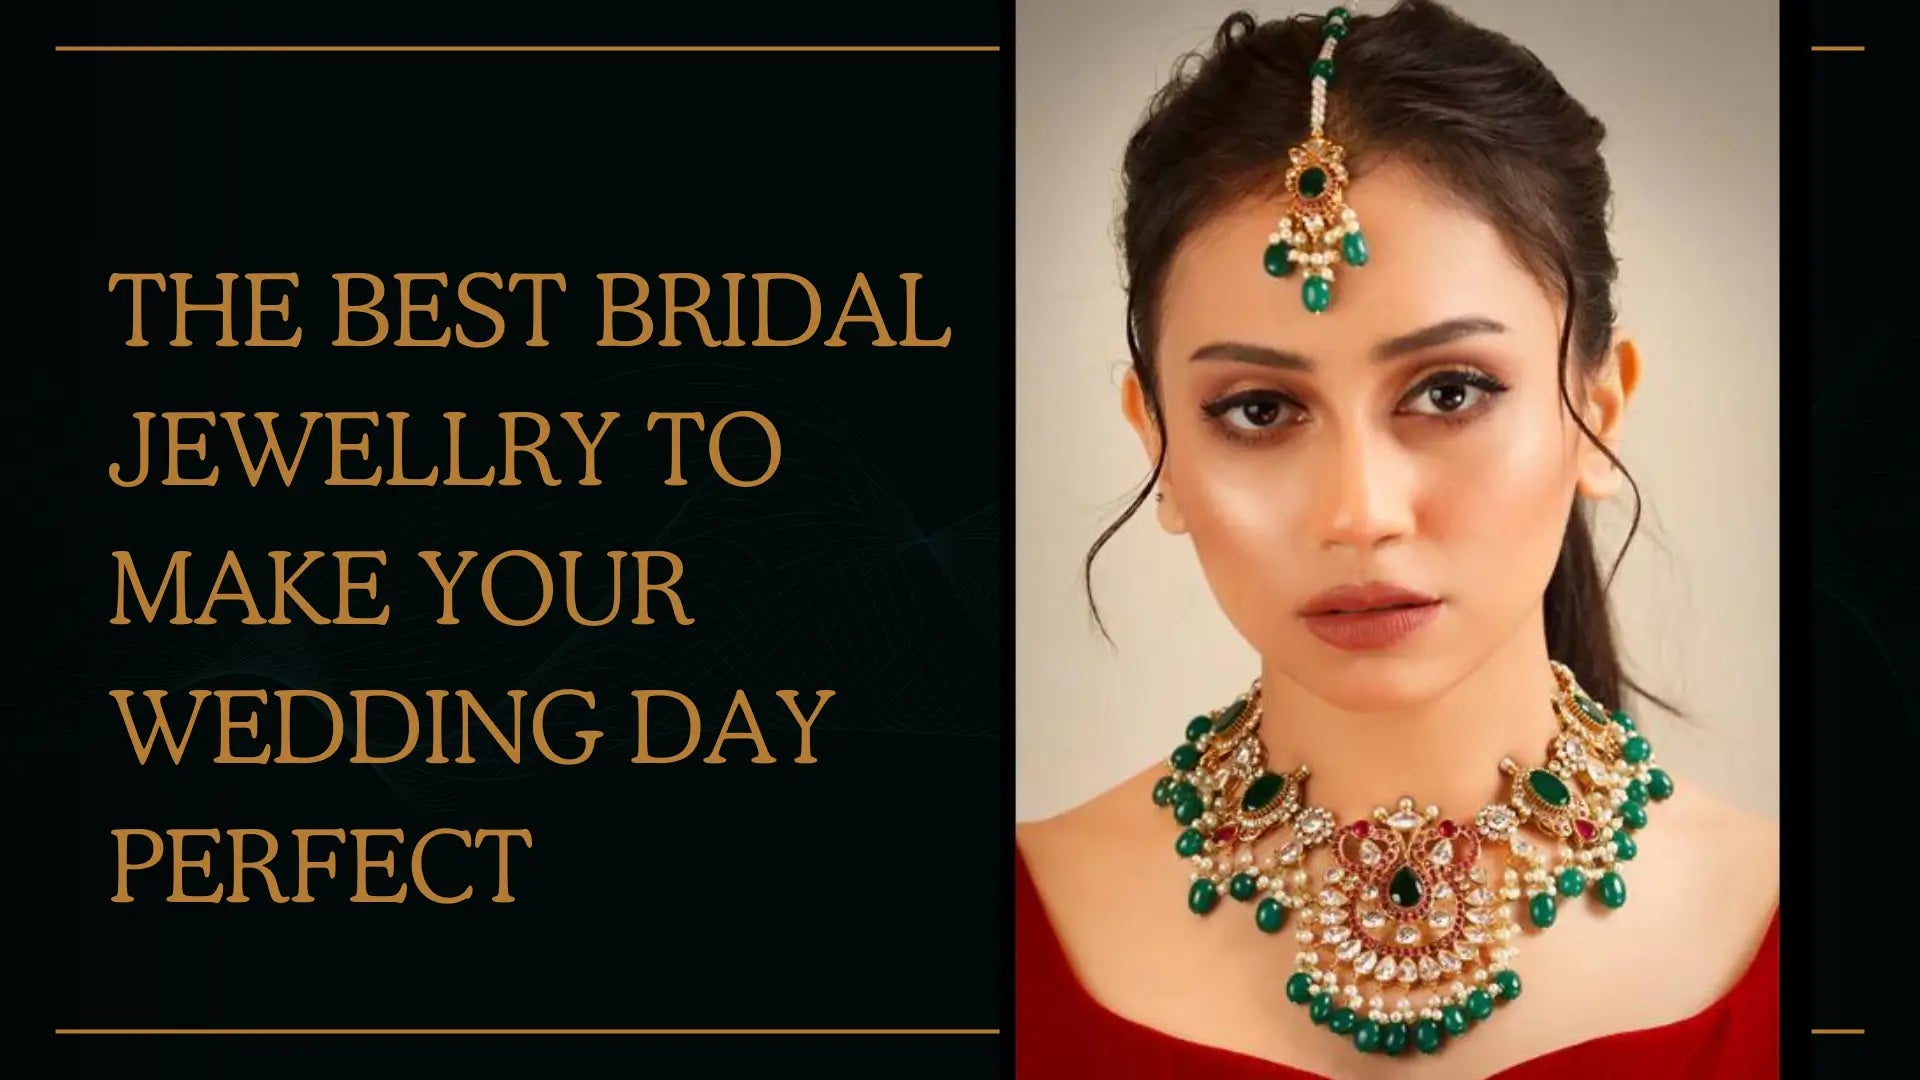 The Best Bridal Jewellery to make your Wedding Day Perfect